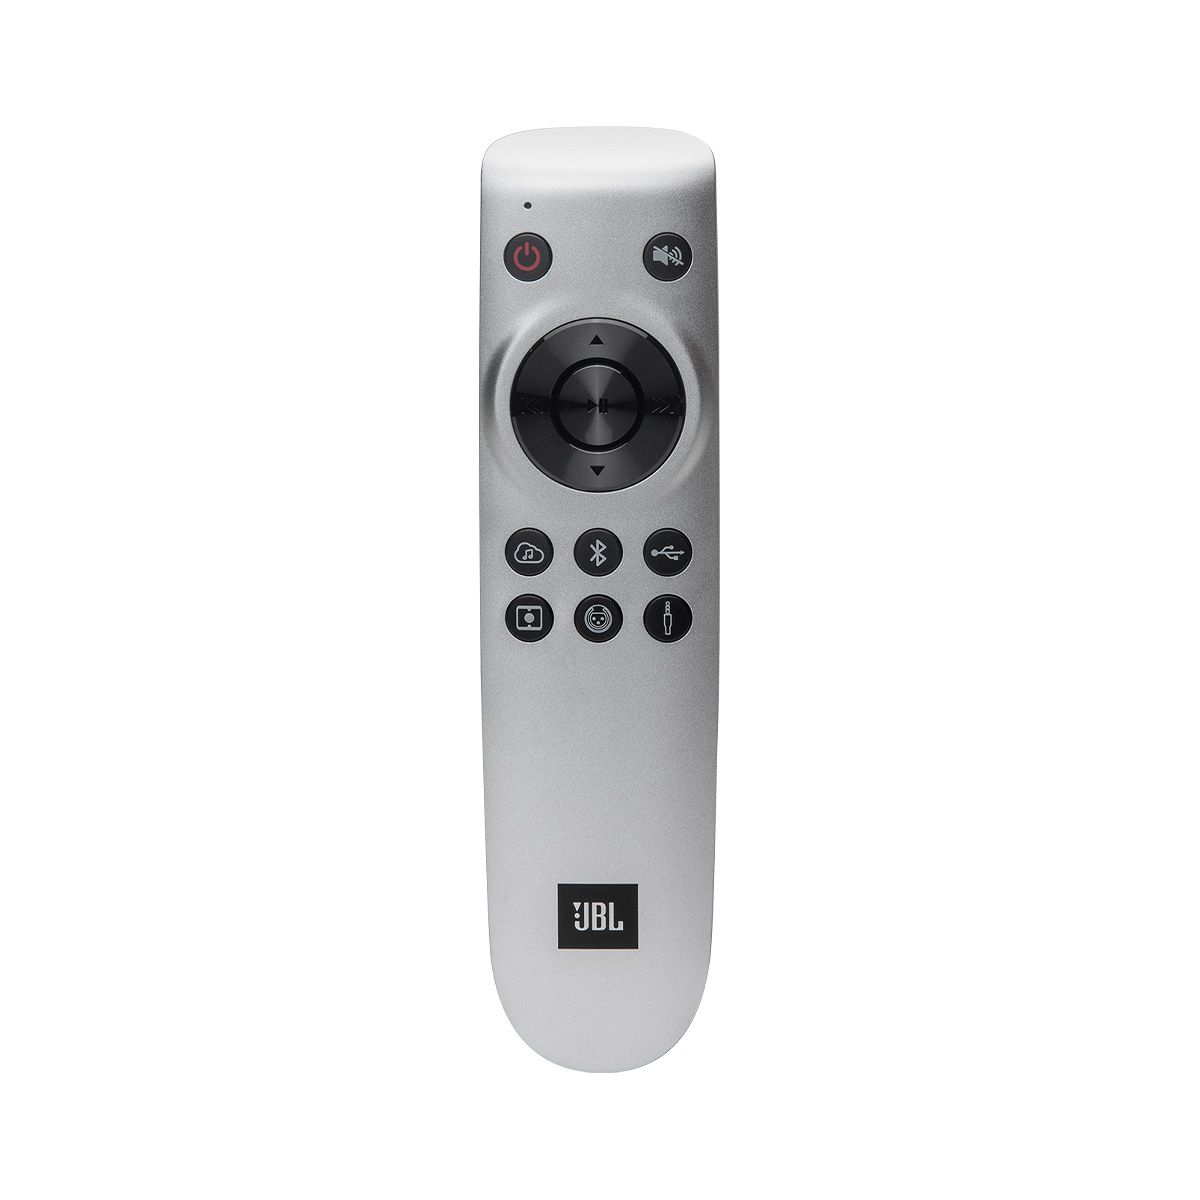 JBL L42ms Integrated Music System remote control